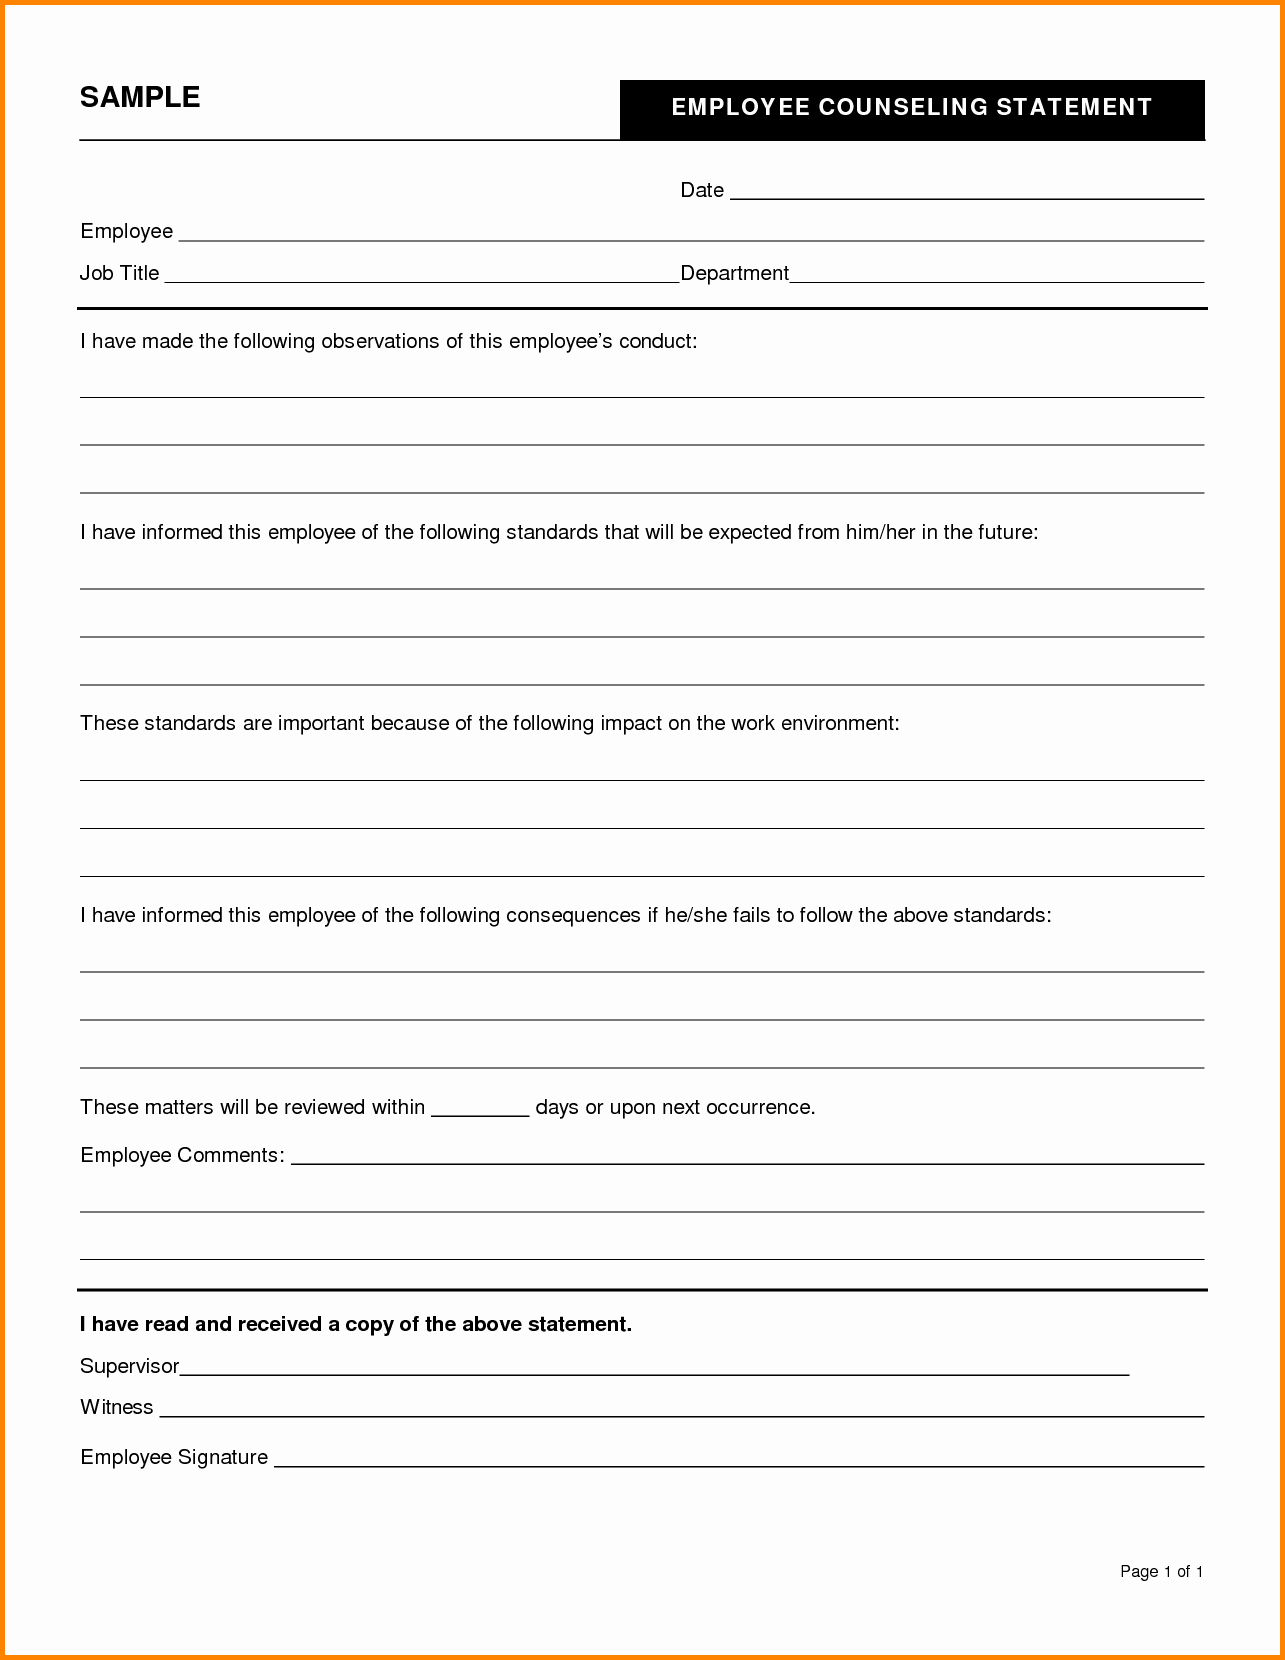 Employee Counseling form Template Beautiful Sample Counseling Statement Irr Transfer – Graetreport